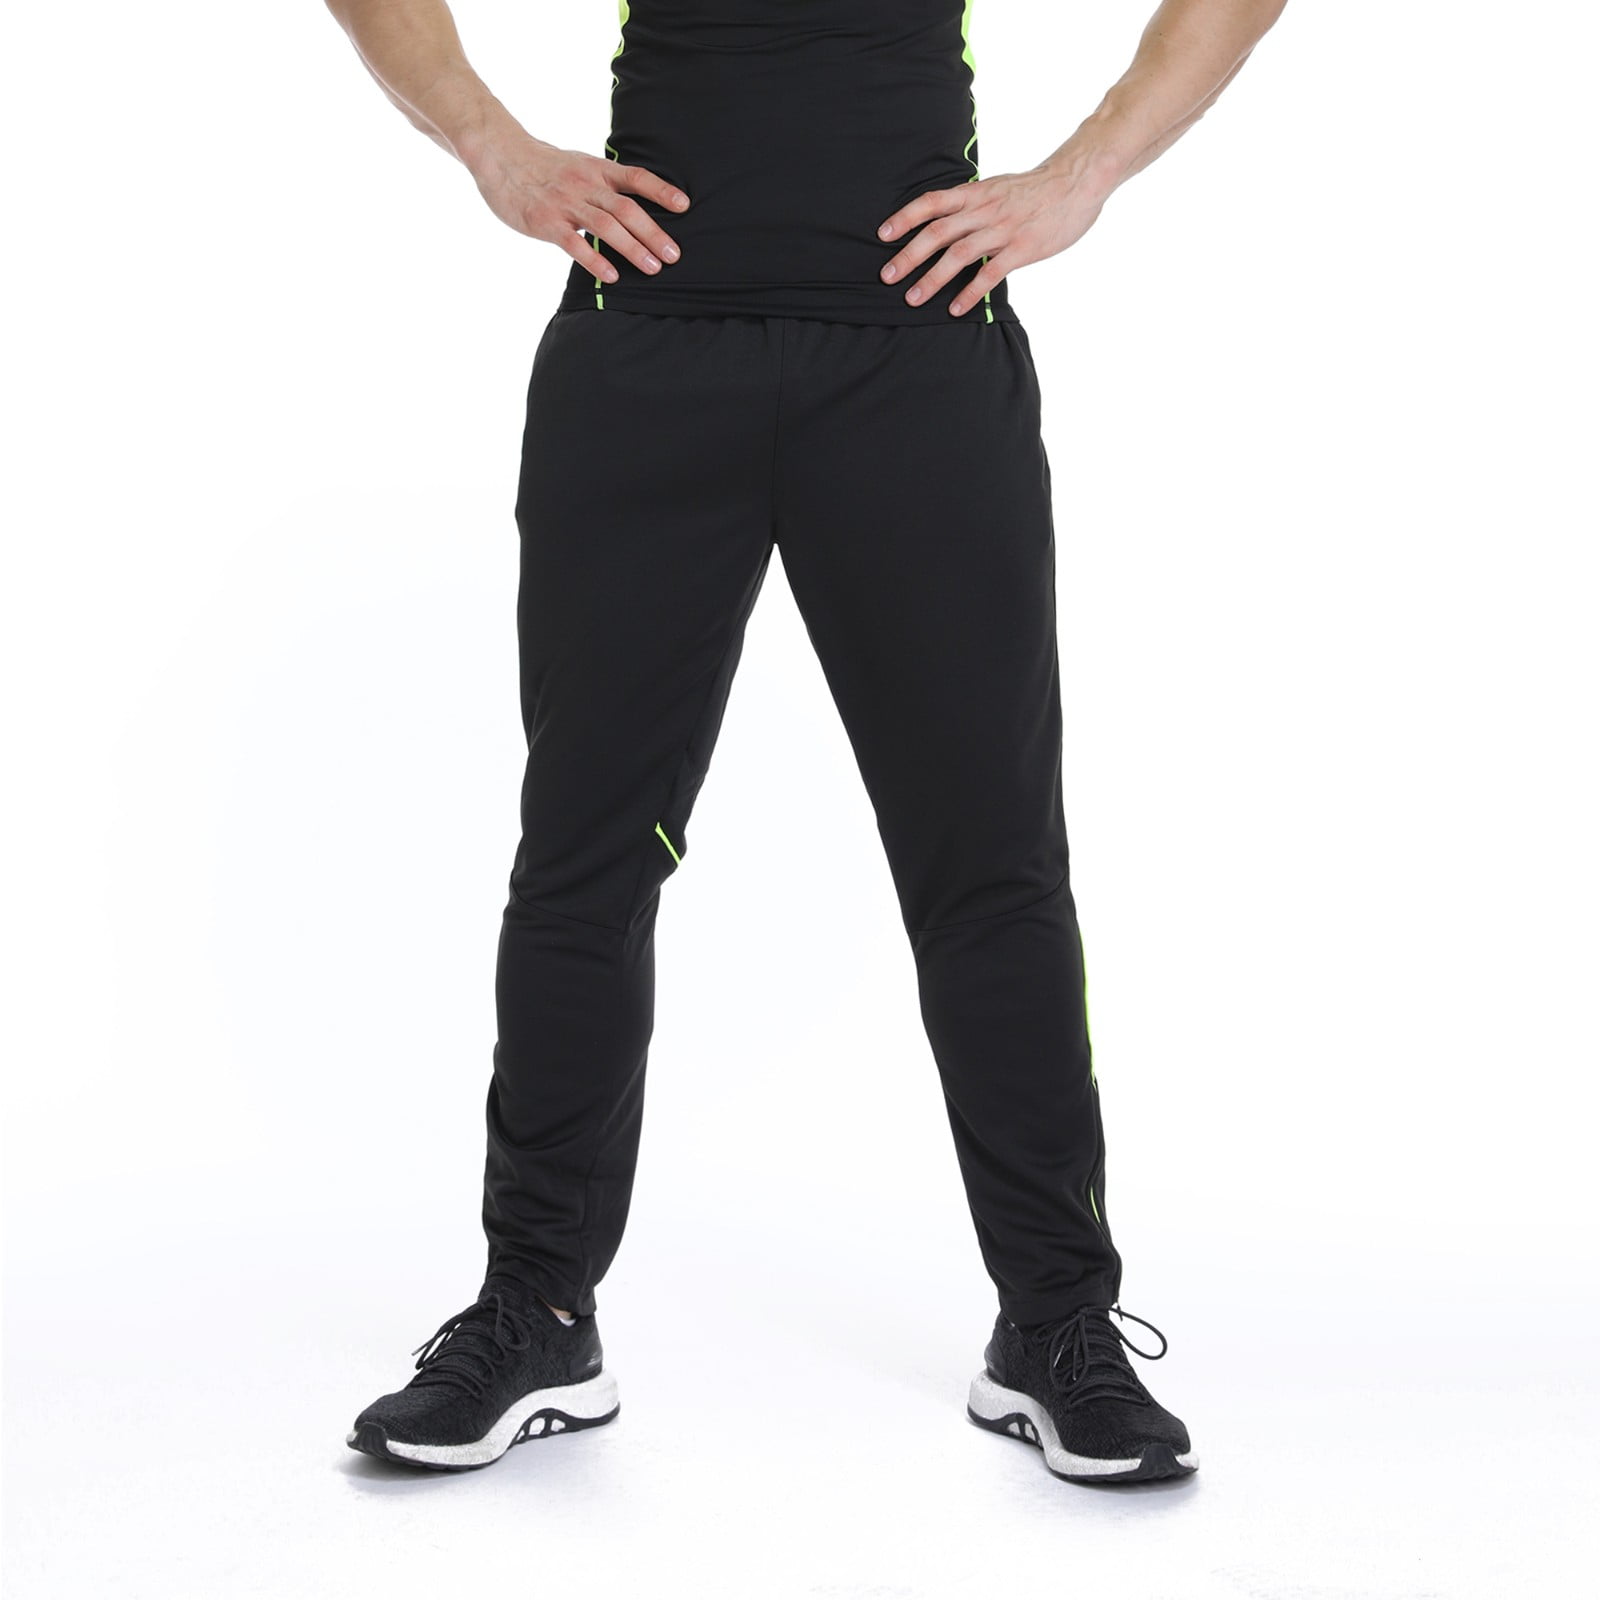 We1Fit Sweatpants for Men with Pockets Lightweight Workout Joggers with Zipper Ankle 